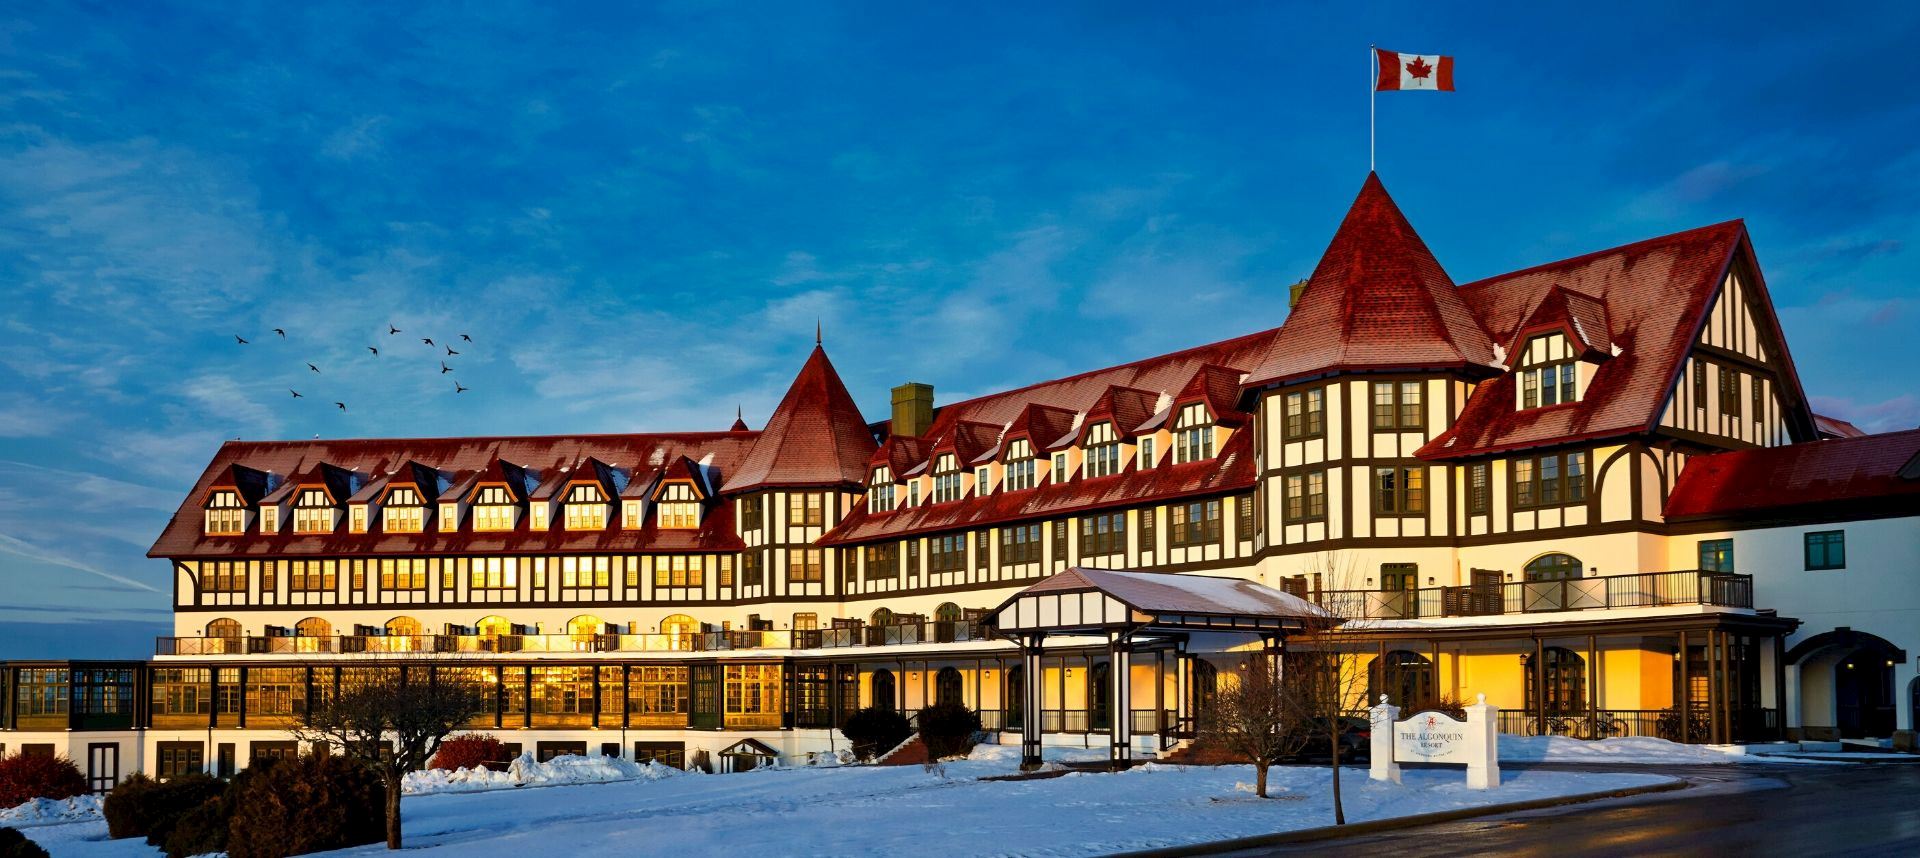 Historic Hotel in St. Andrews | Algonquin Hotel | Ghost bride